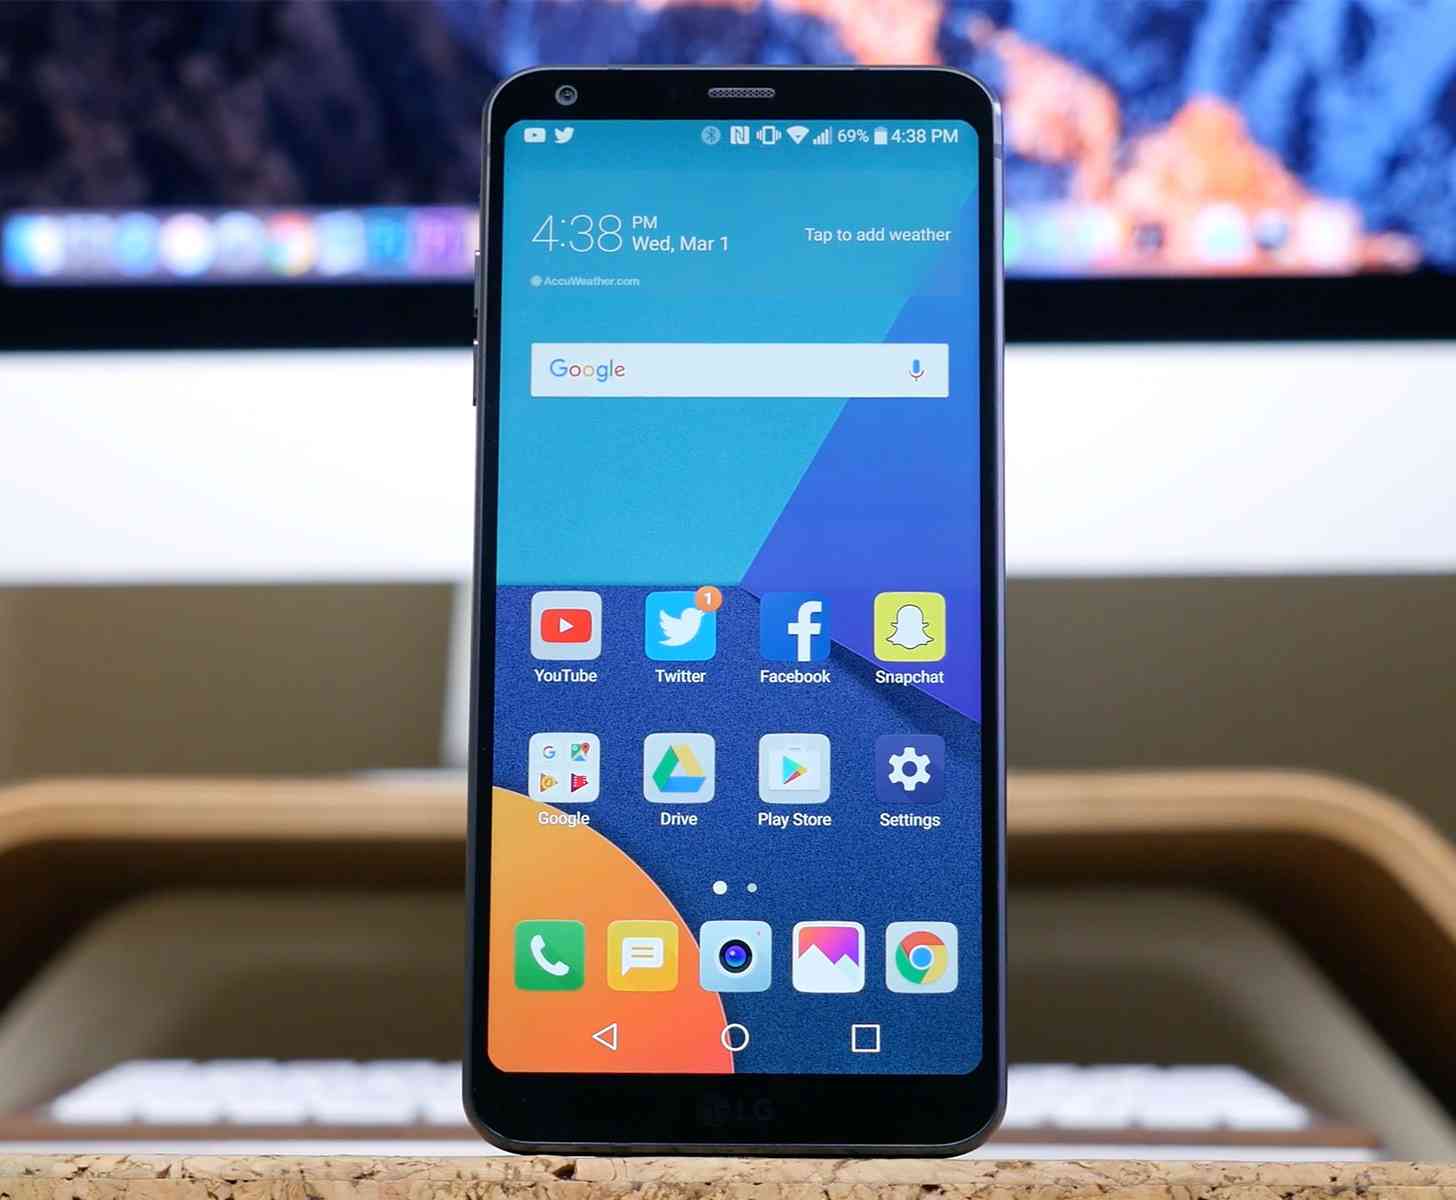 LG G6 hands-on review